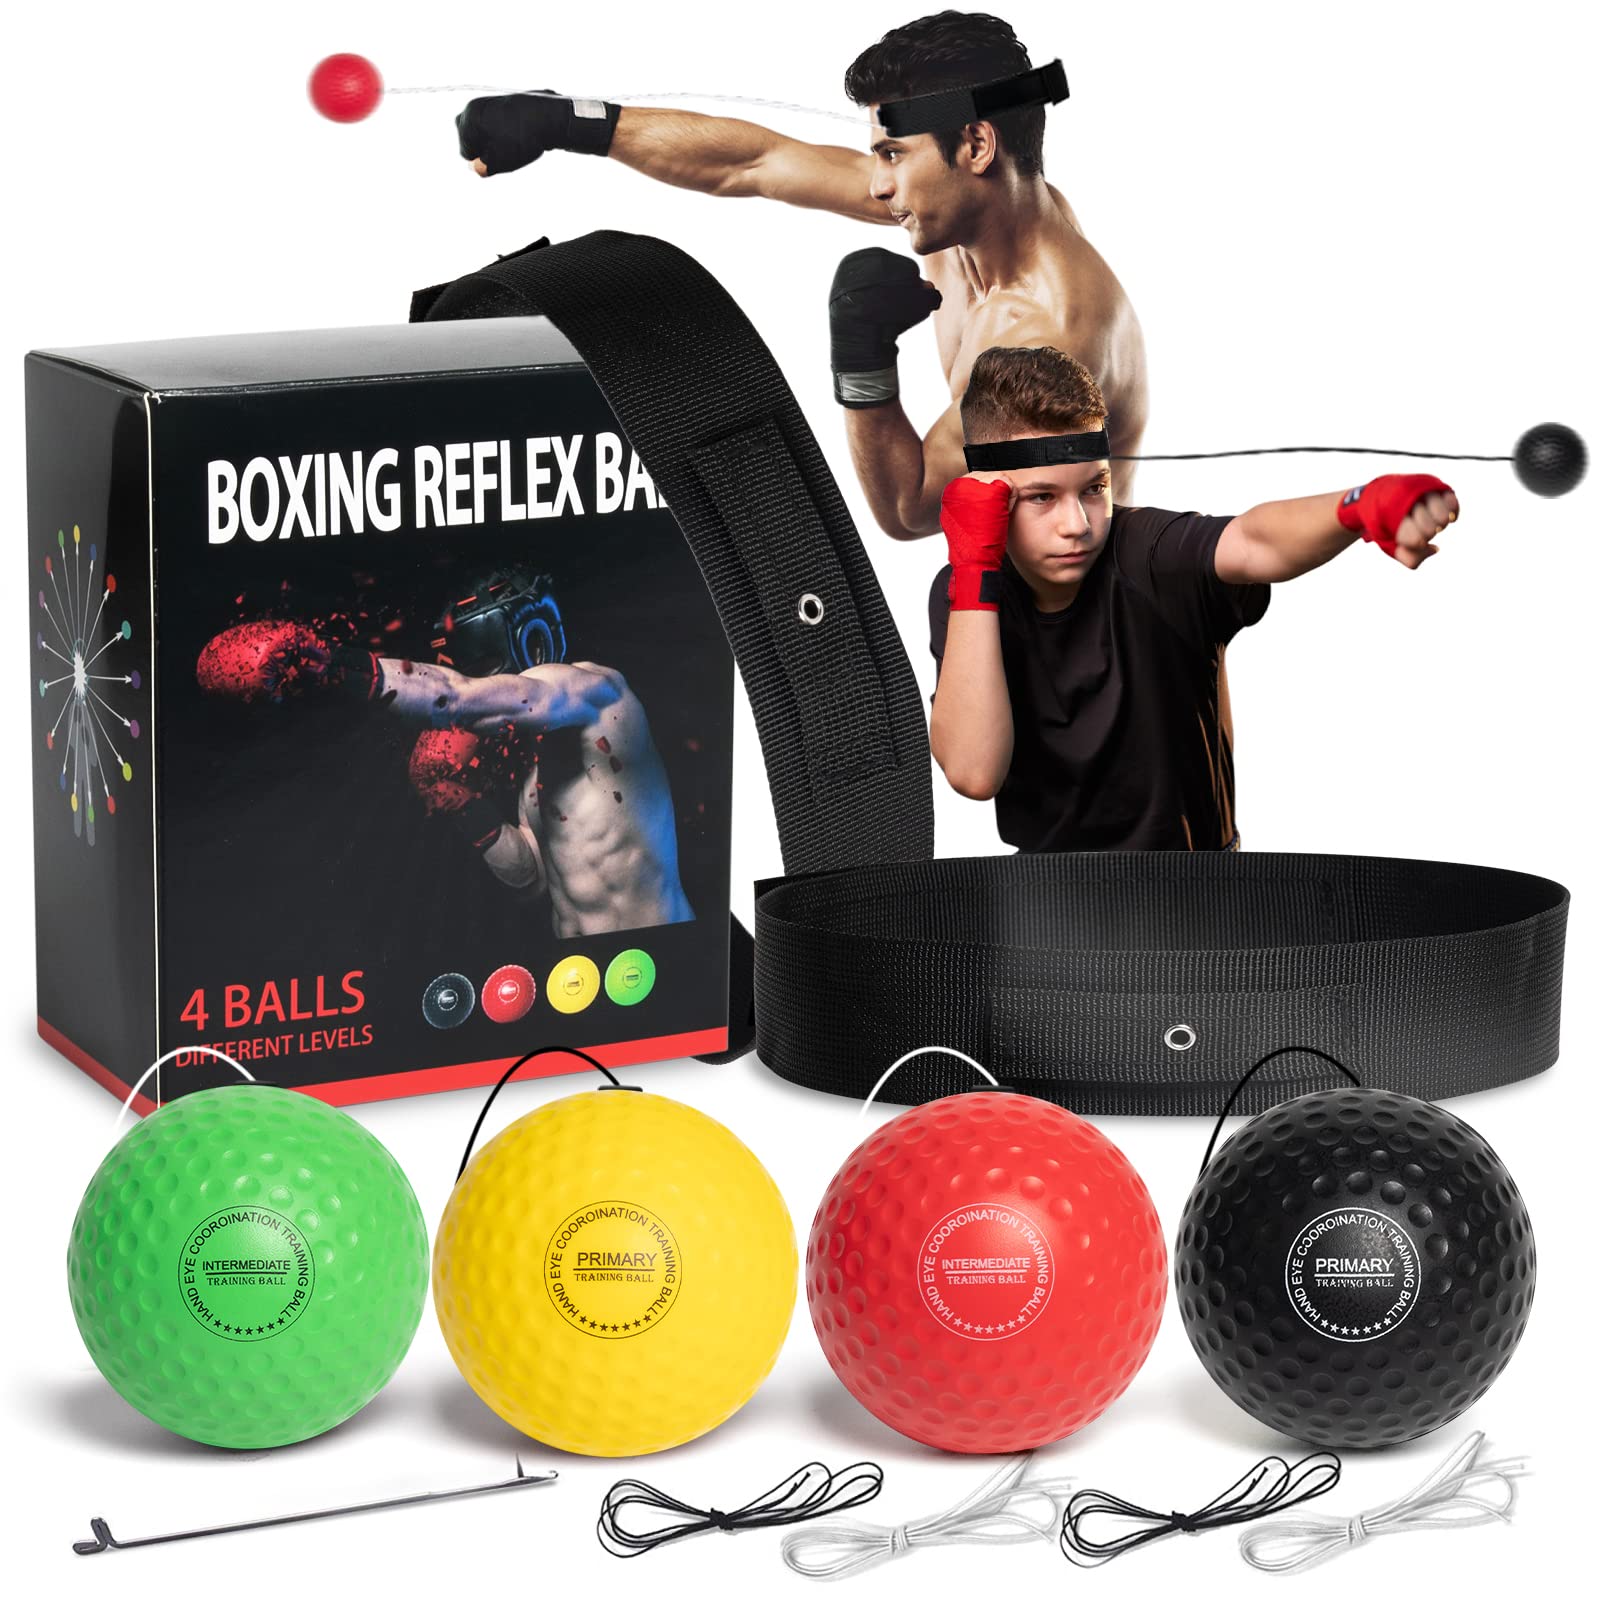 Boxing Reflex Ball, 3 Levels Activpulse Reflex Ball With Adjustable  Headband, Boxing Trainer For Hand-eye Coordination, Kick Ball For Reactions